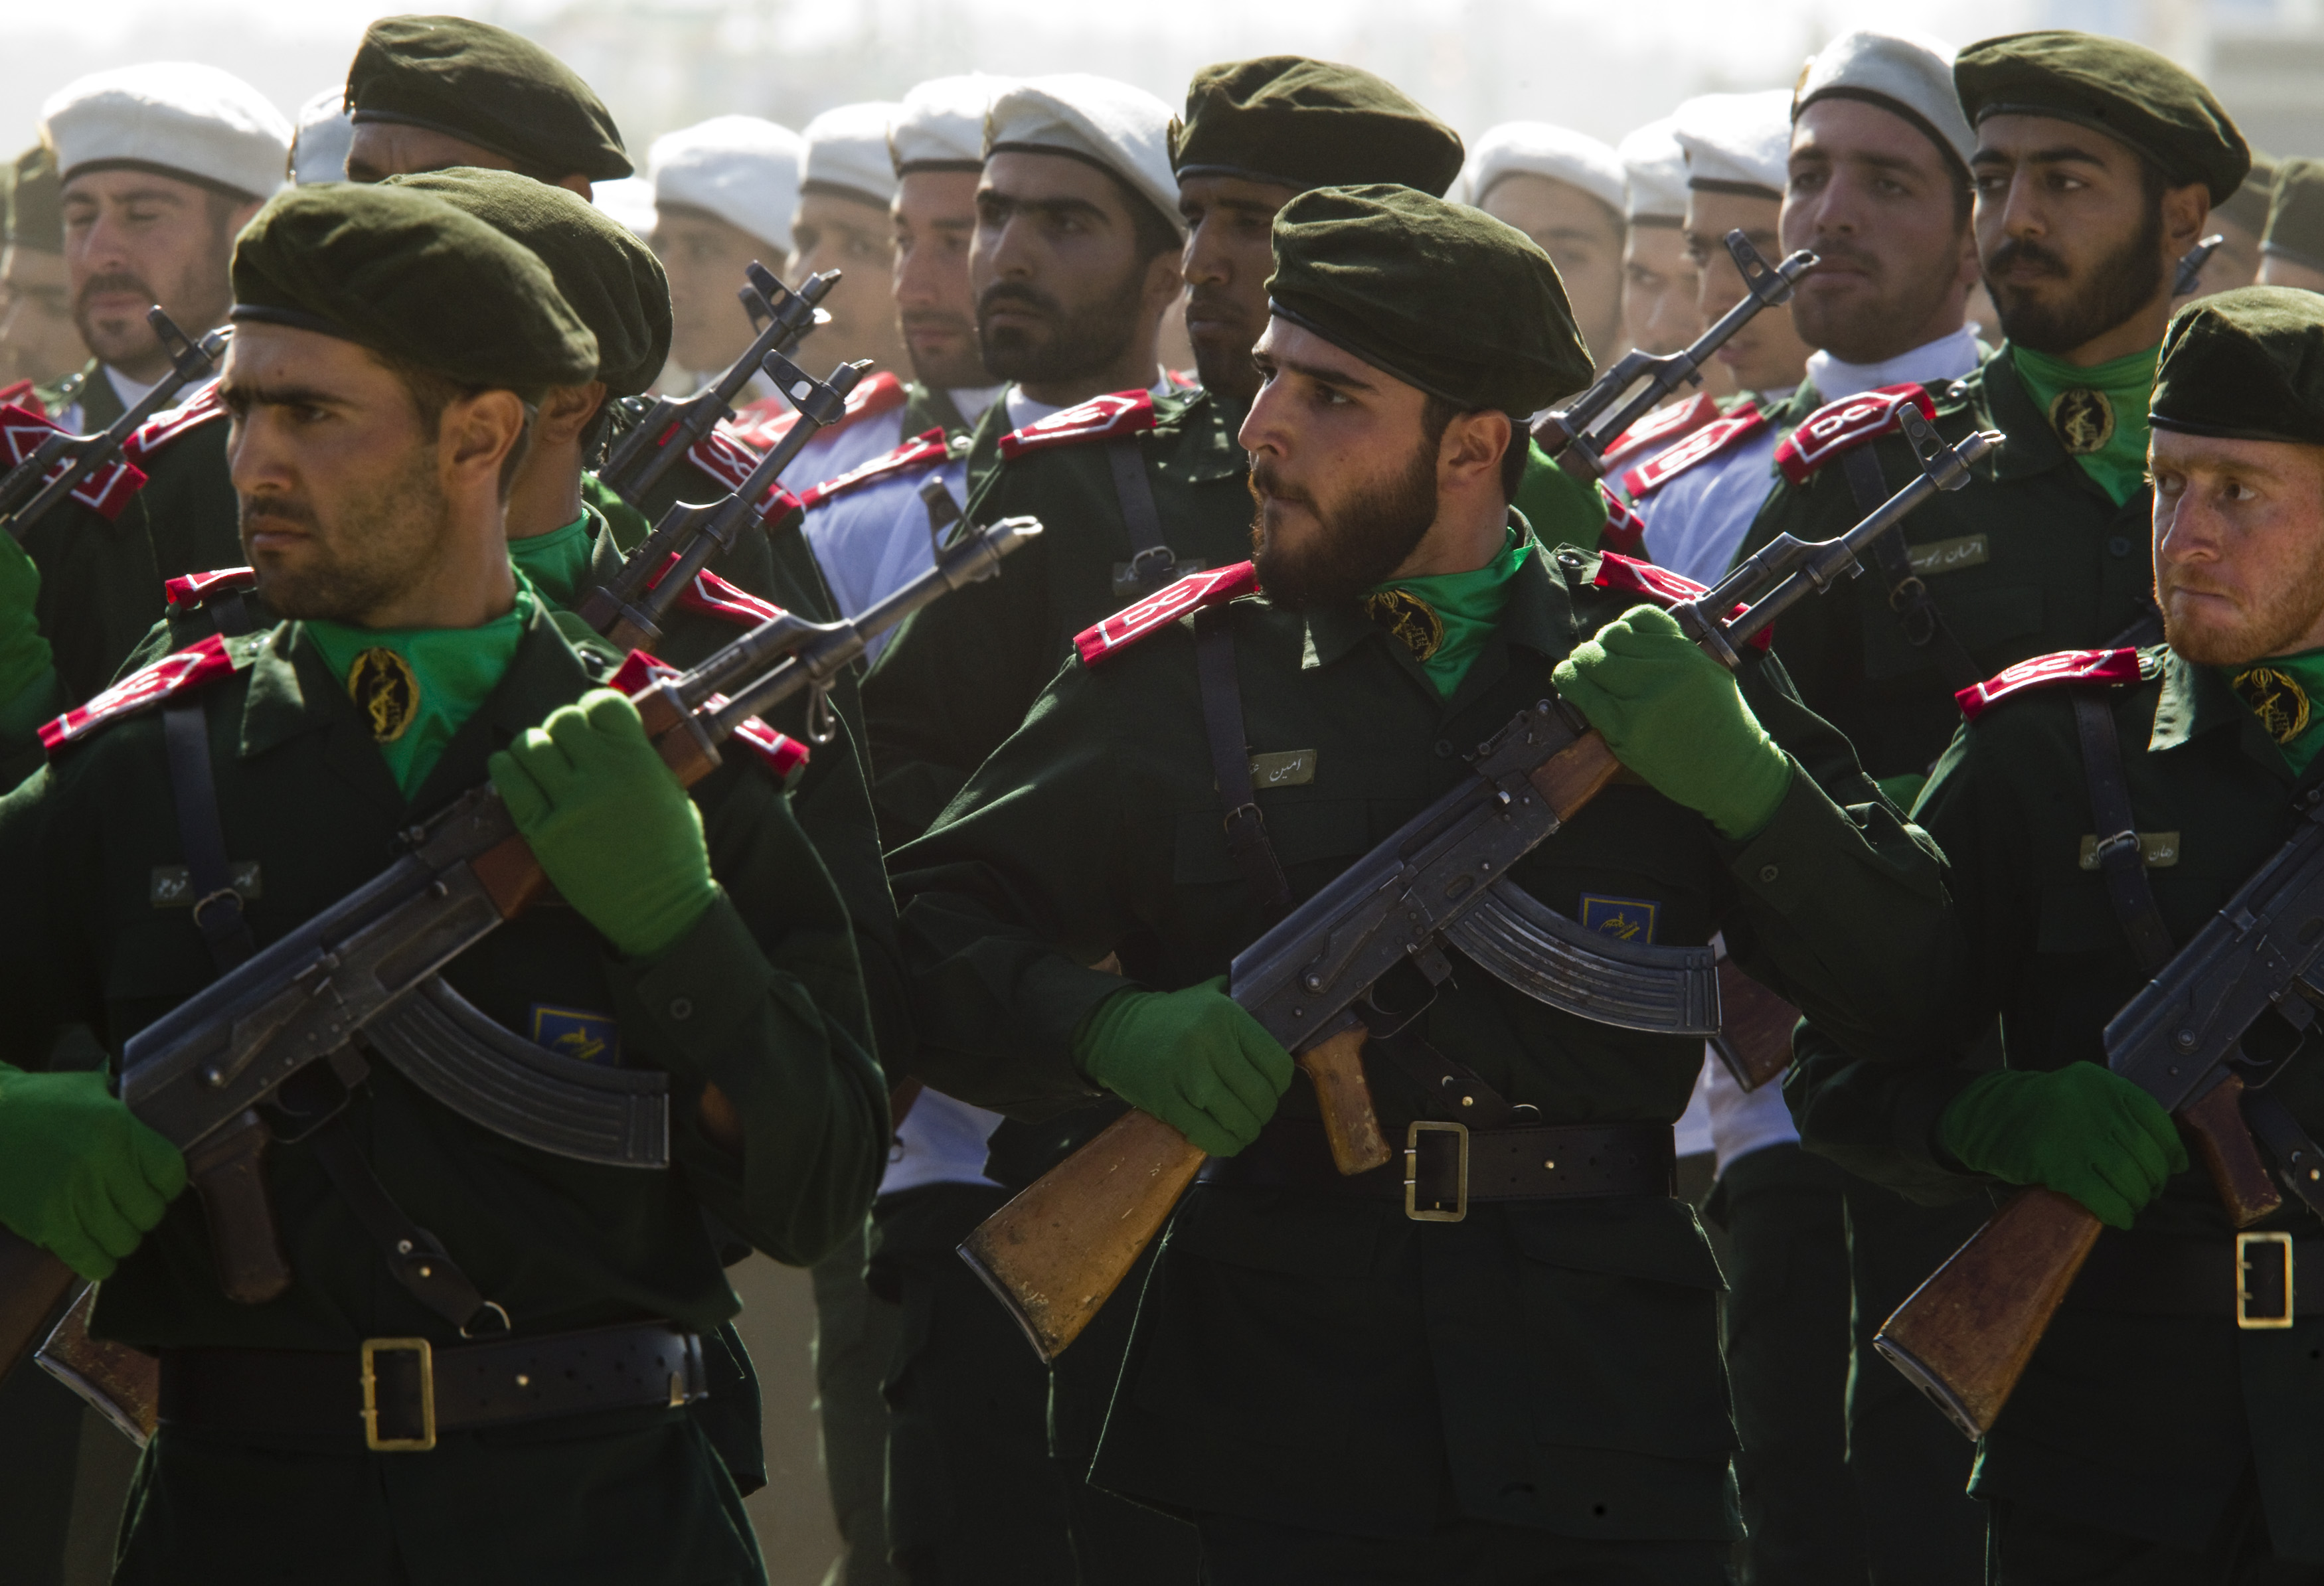 Members of Iran's Revolutionary Guards march during a parade to commemorate anniversary of Iran-Iraq war, in Tehran